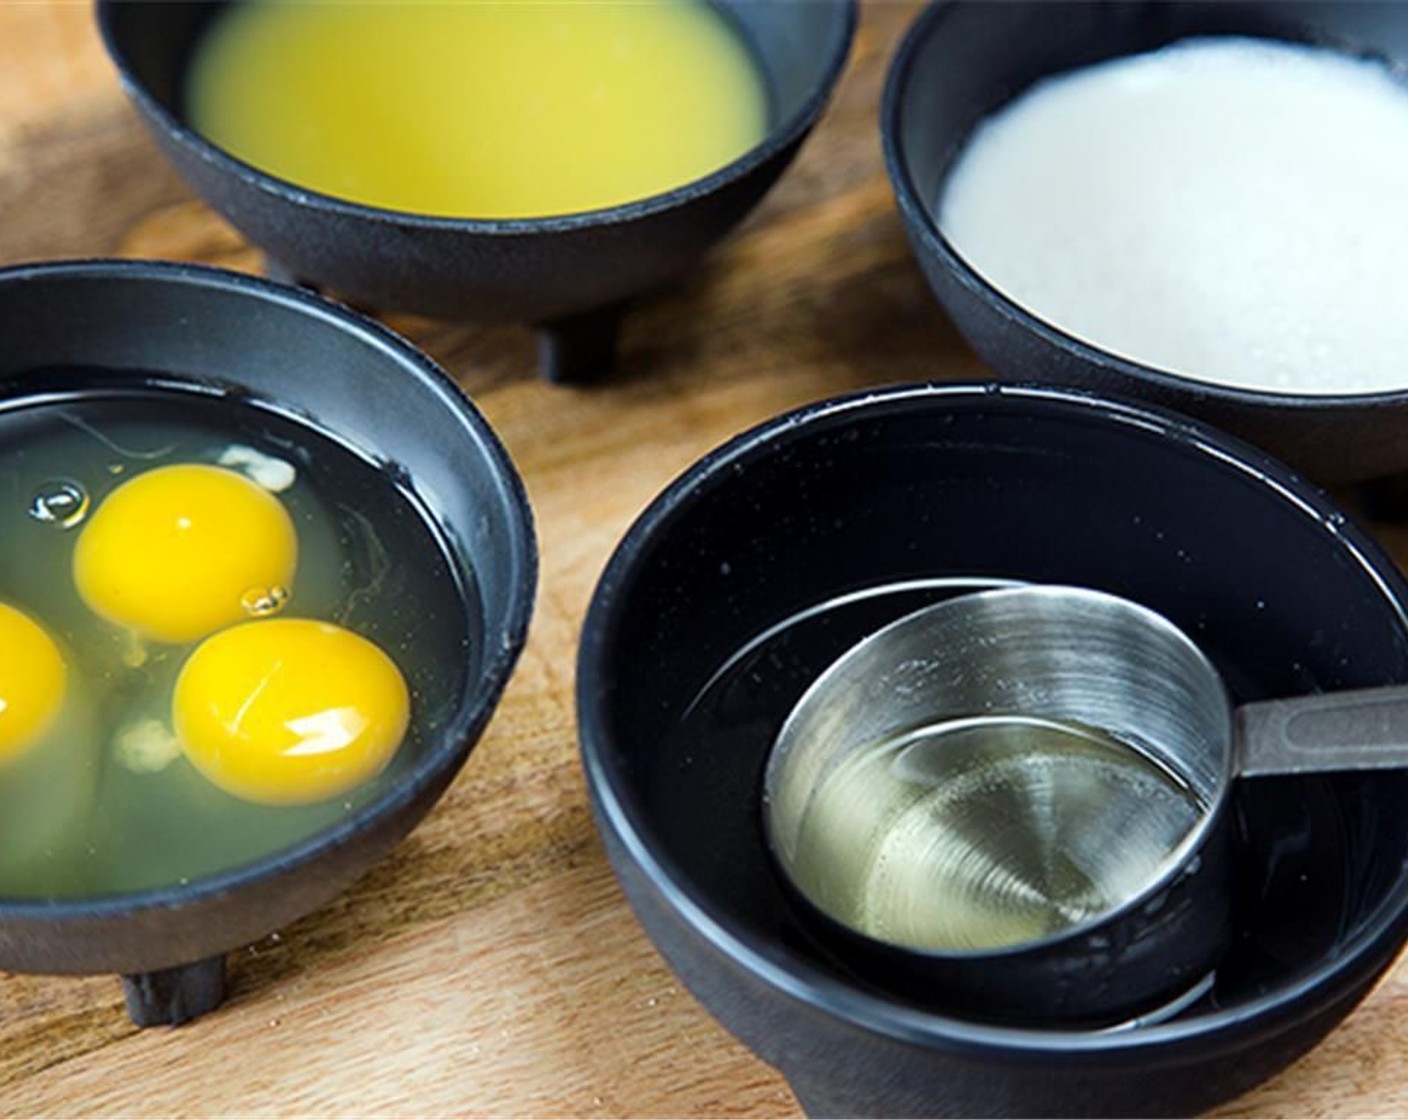 step 2 In a small bowl combine Eggs (3), juice from Oranges (2), Milk (1/2 cup), Oil (1/2 cup) and set aside.